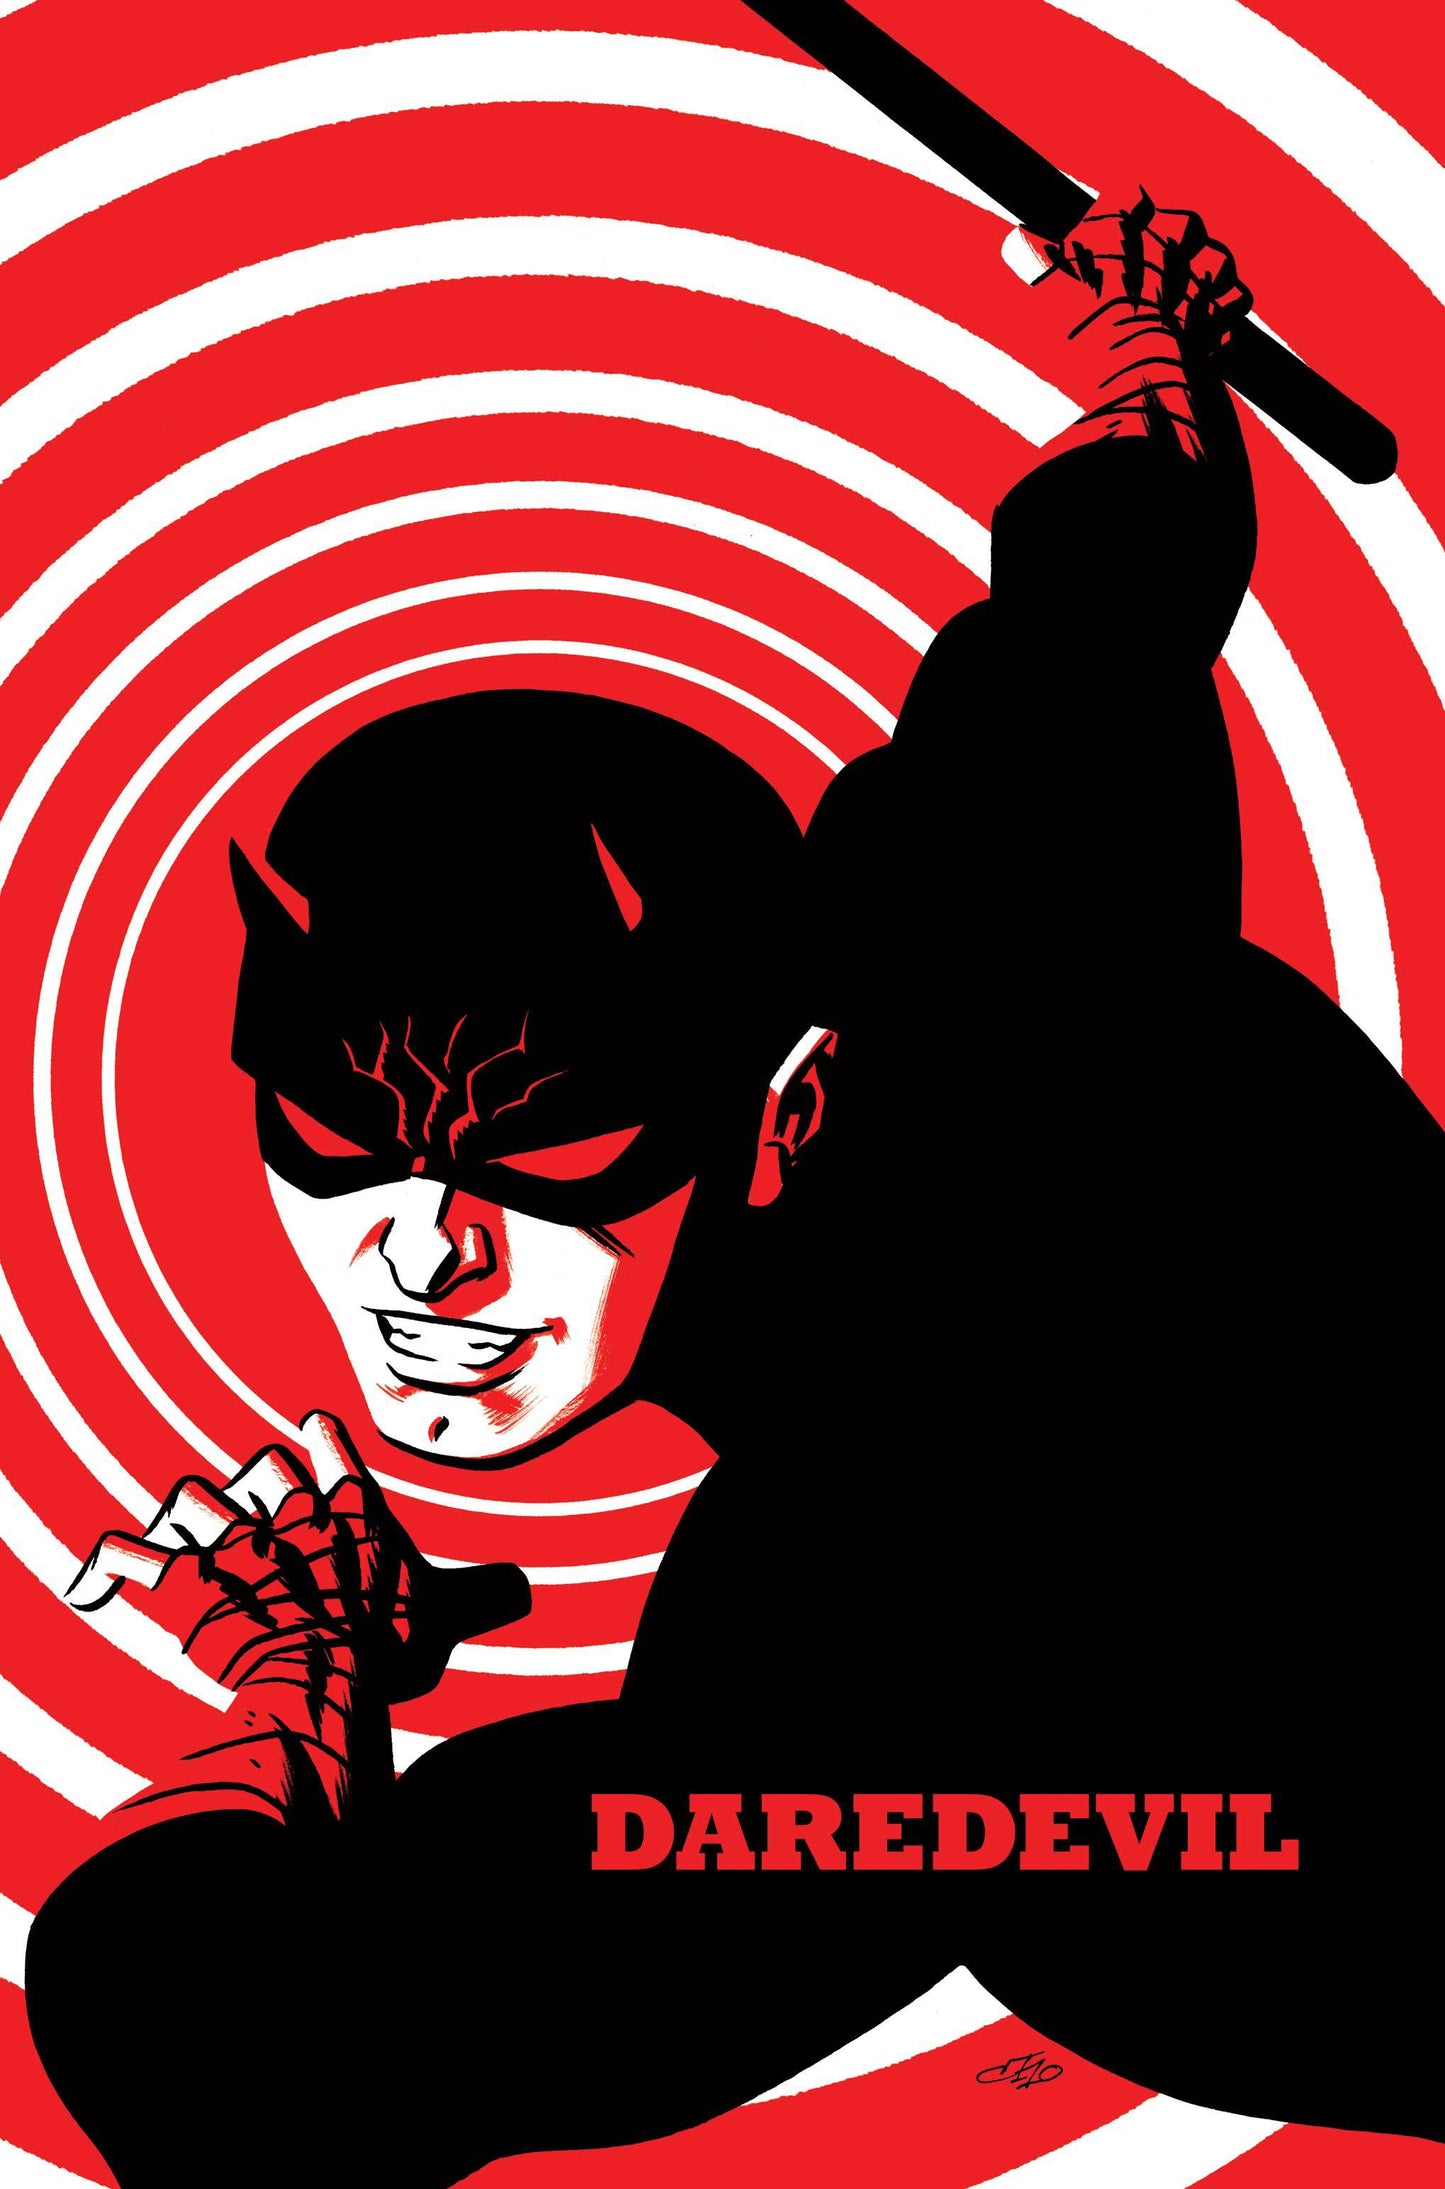 POSTER: DAREDEVIL by Michael Cho